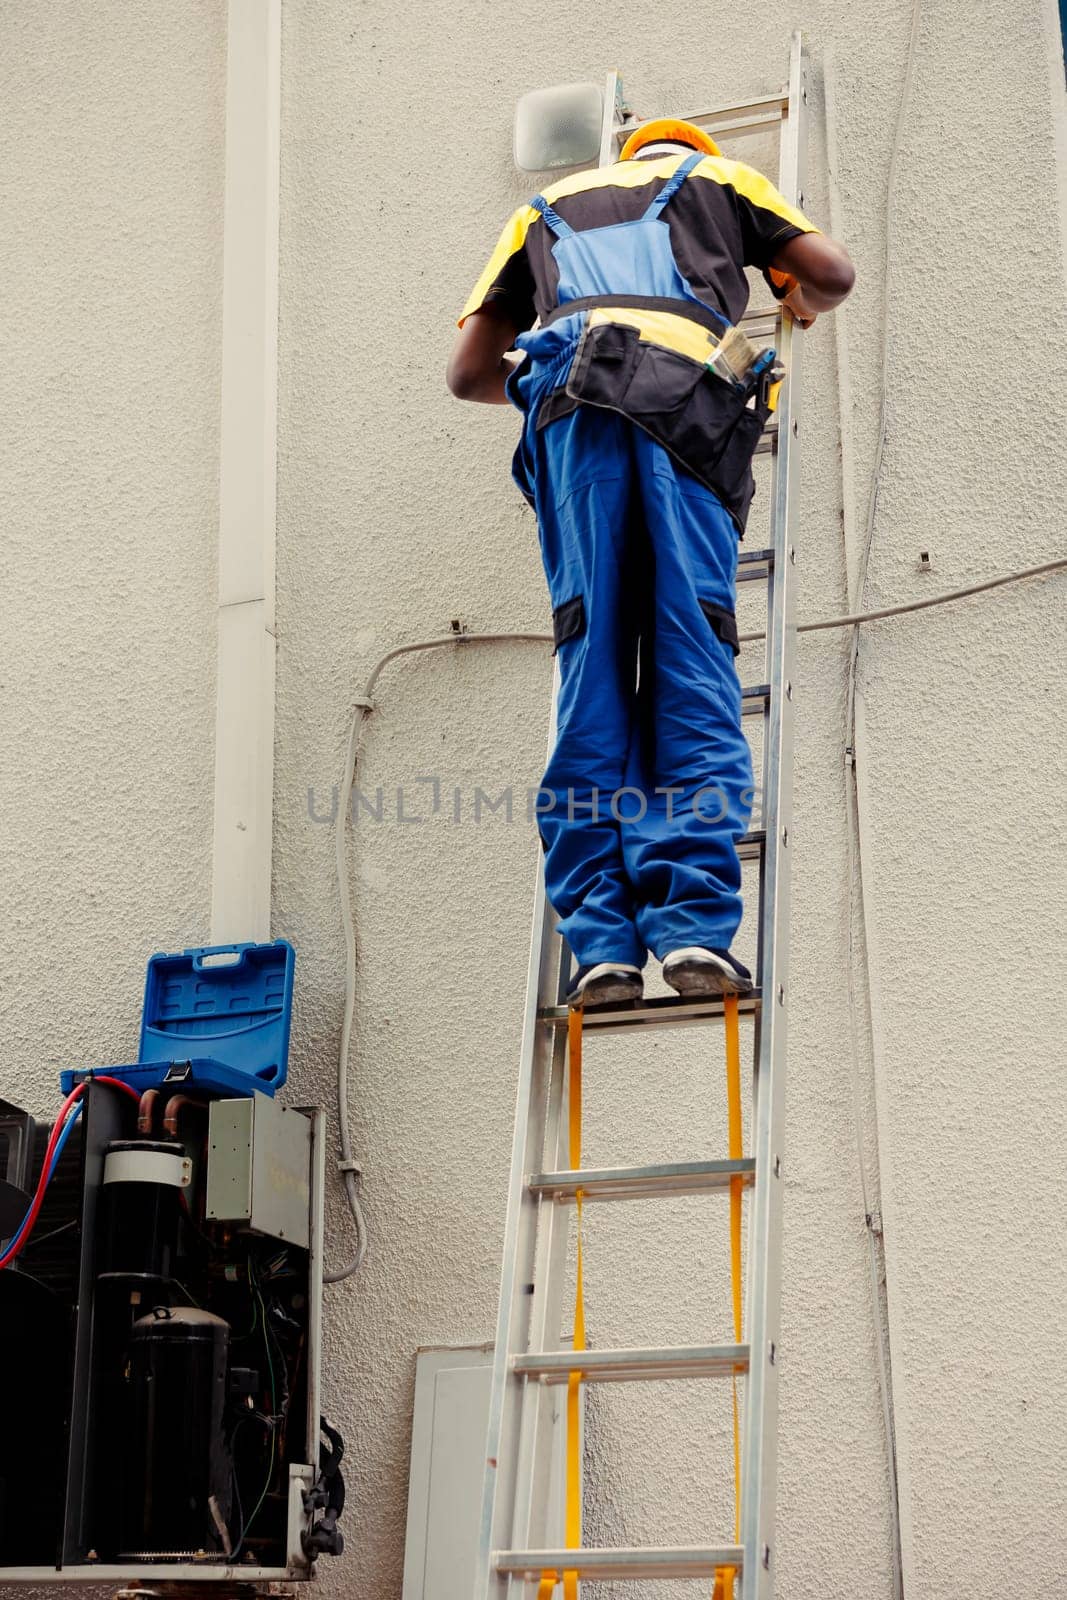 Competent mechanic in professional uniform with technical equipment climbing folding ladder to do maintenance on rooftop hvac system. Expert repairman commissioned to check up on air conditioner